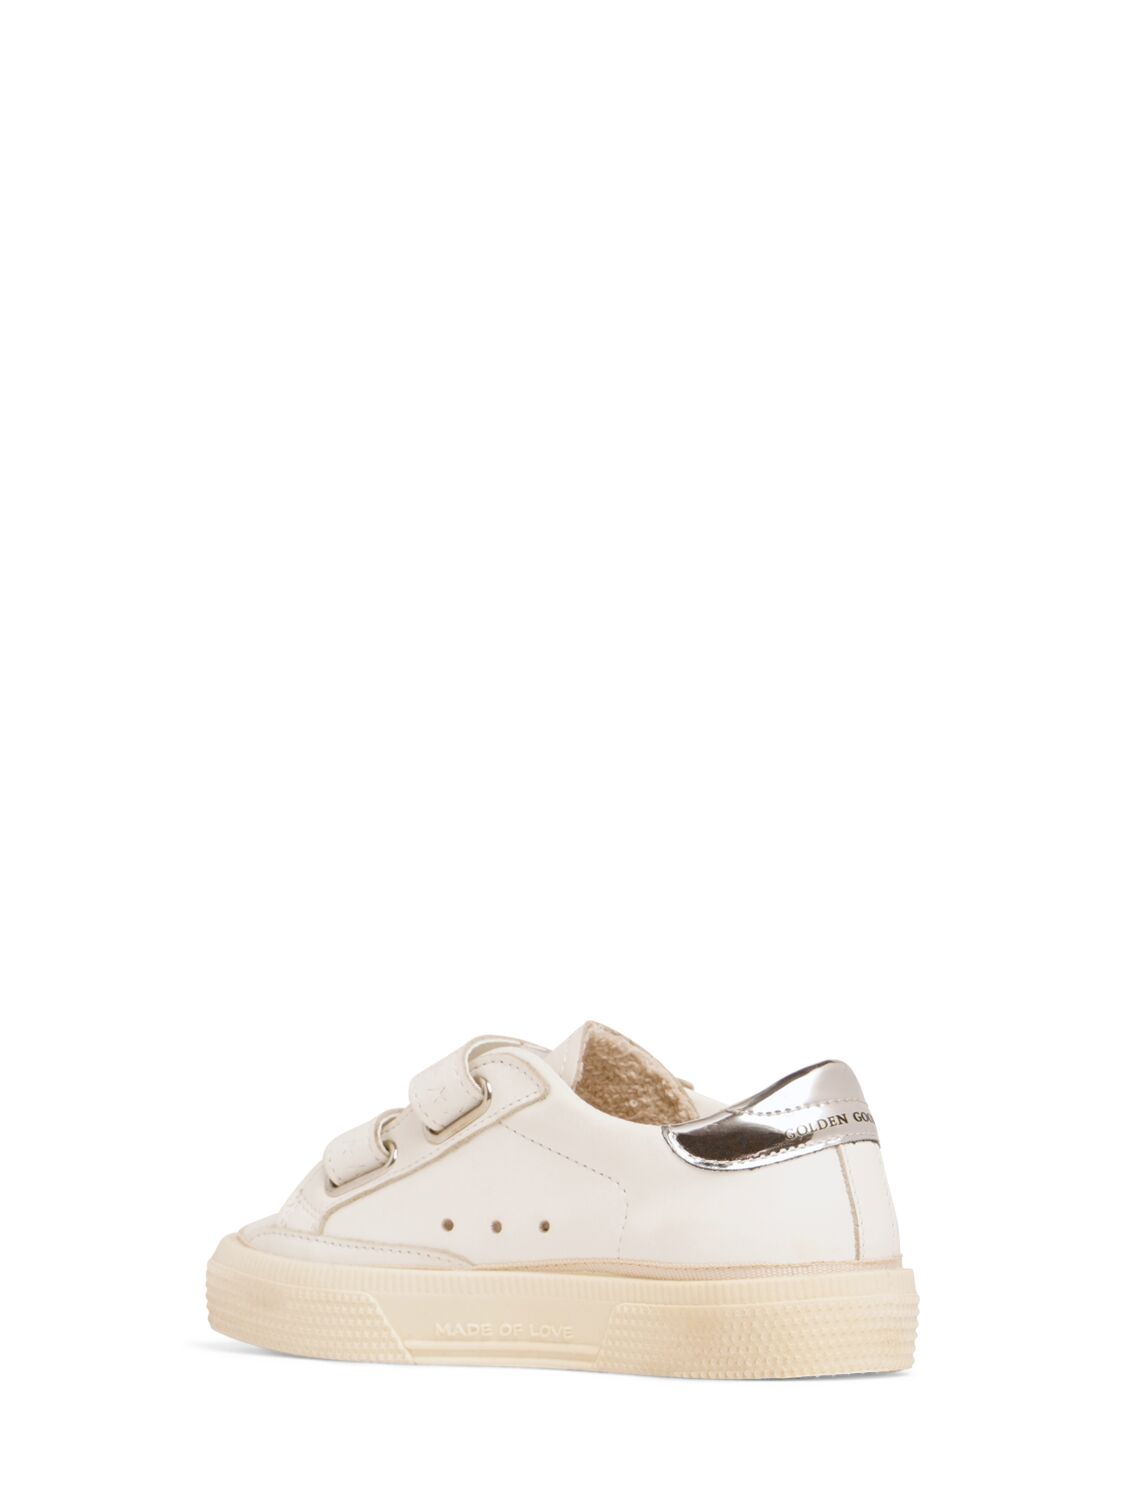 Shop Golden Goose May School Leather Strap Sneakers In White,silver